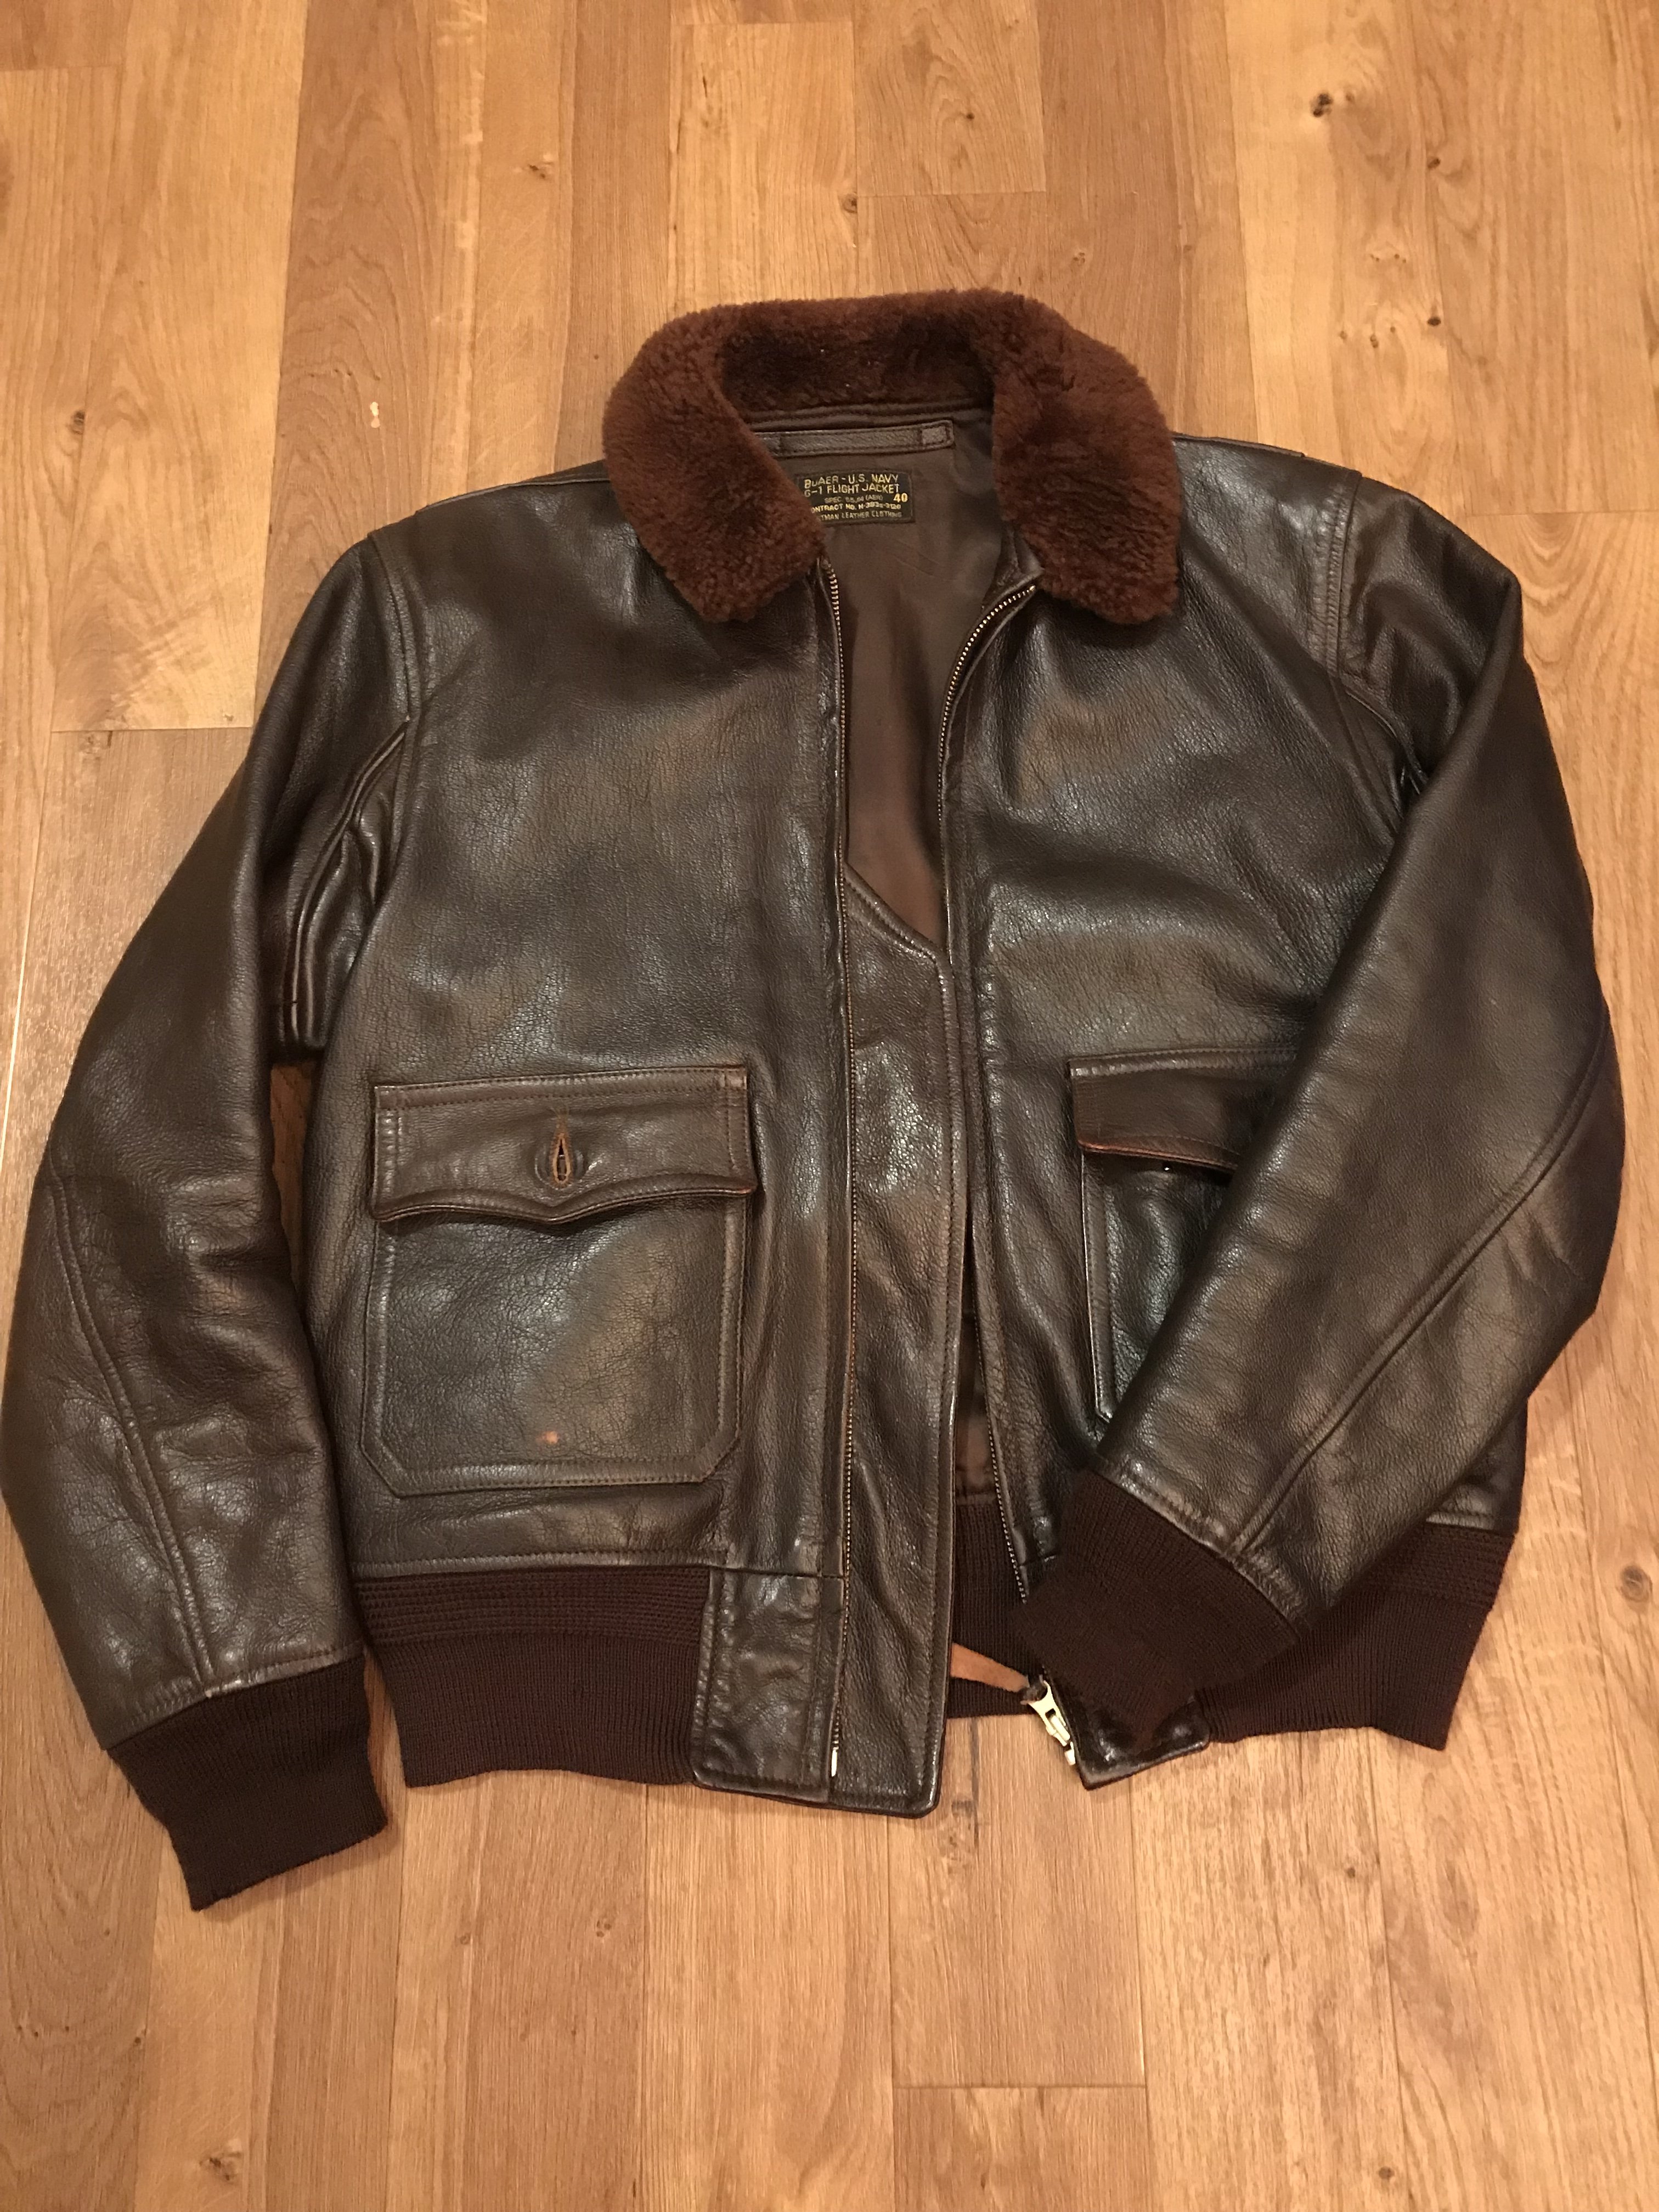 A2 different contracts | Vintage Leather Jackets Forum